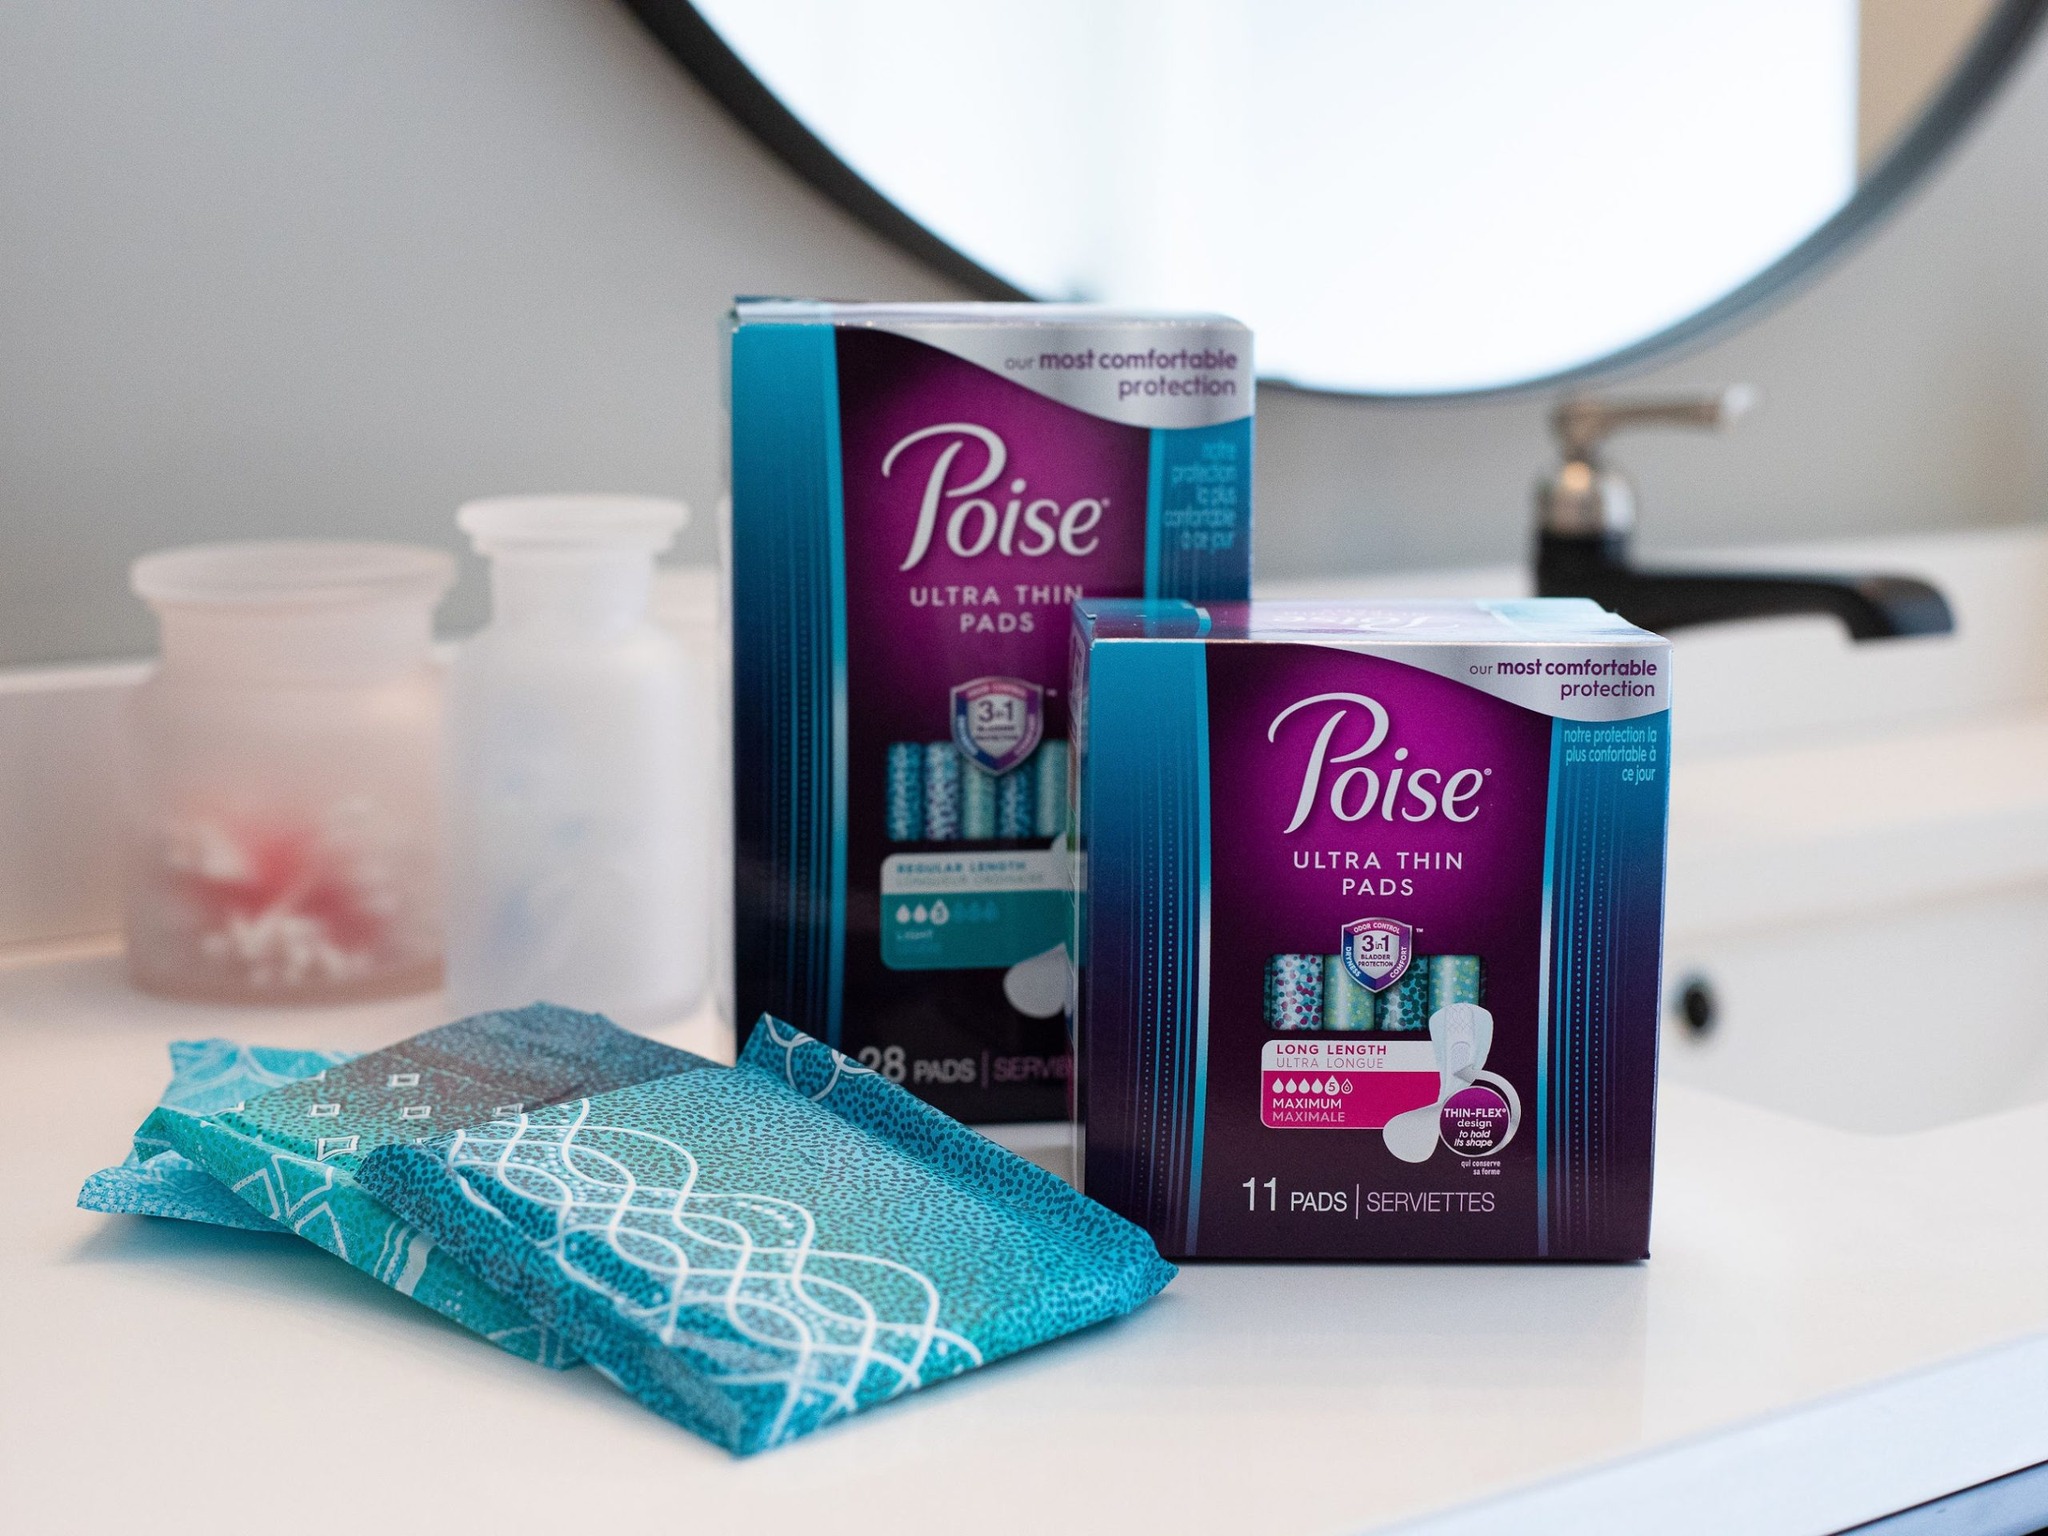 Poise Pads As Low As $1.99 At Publix